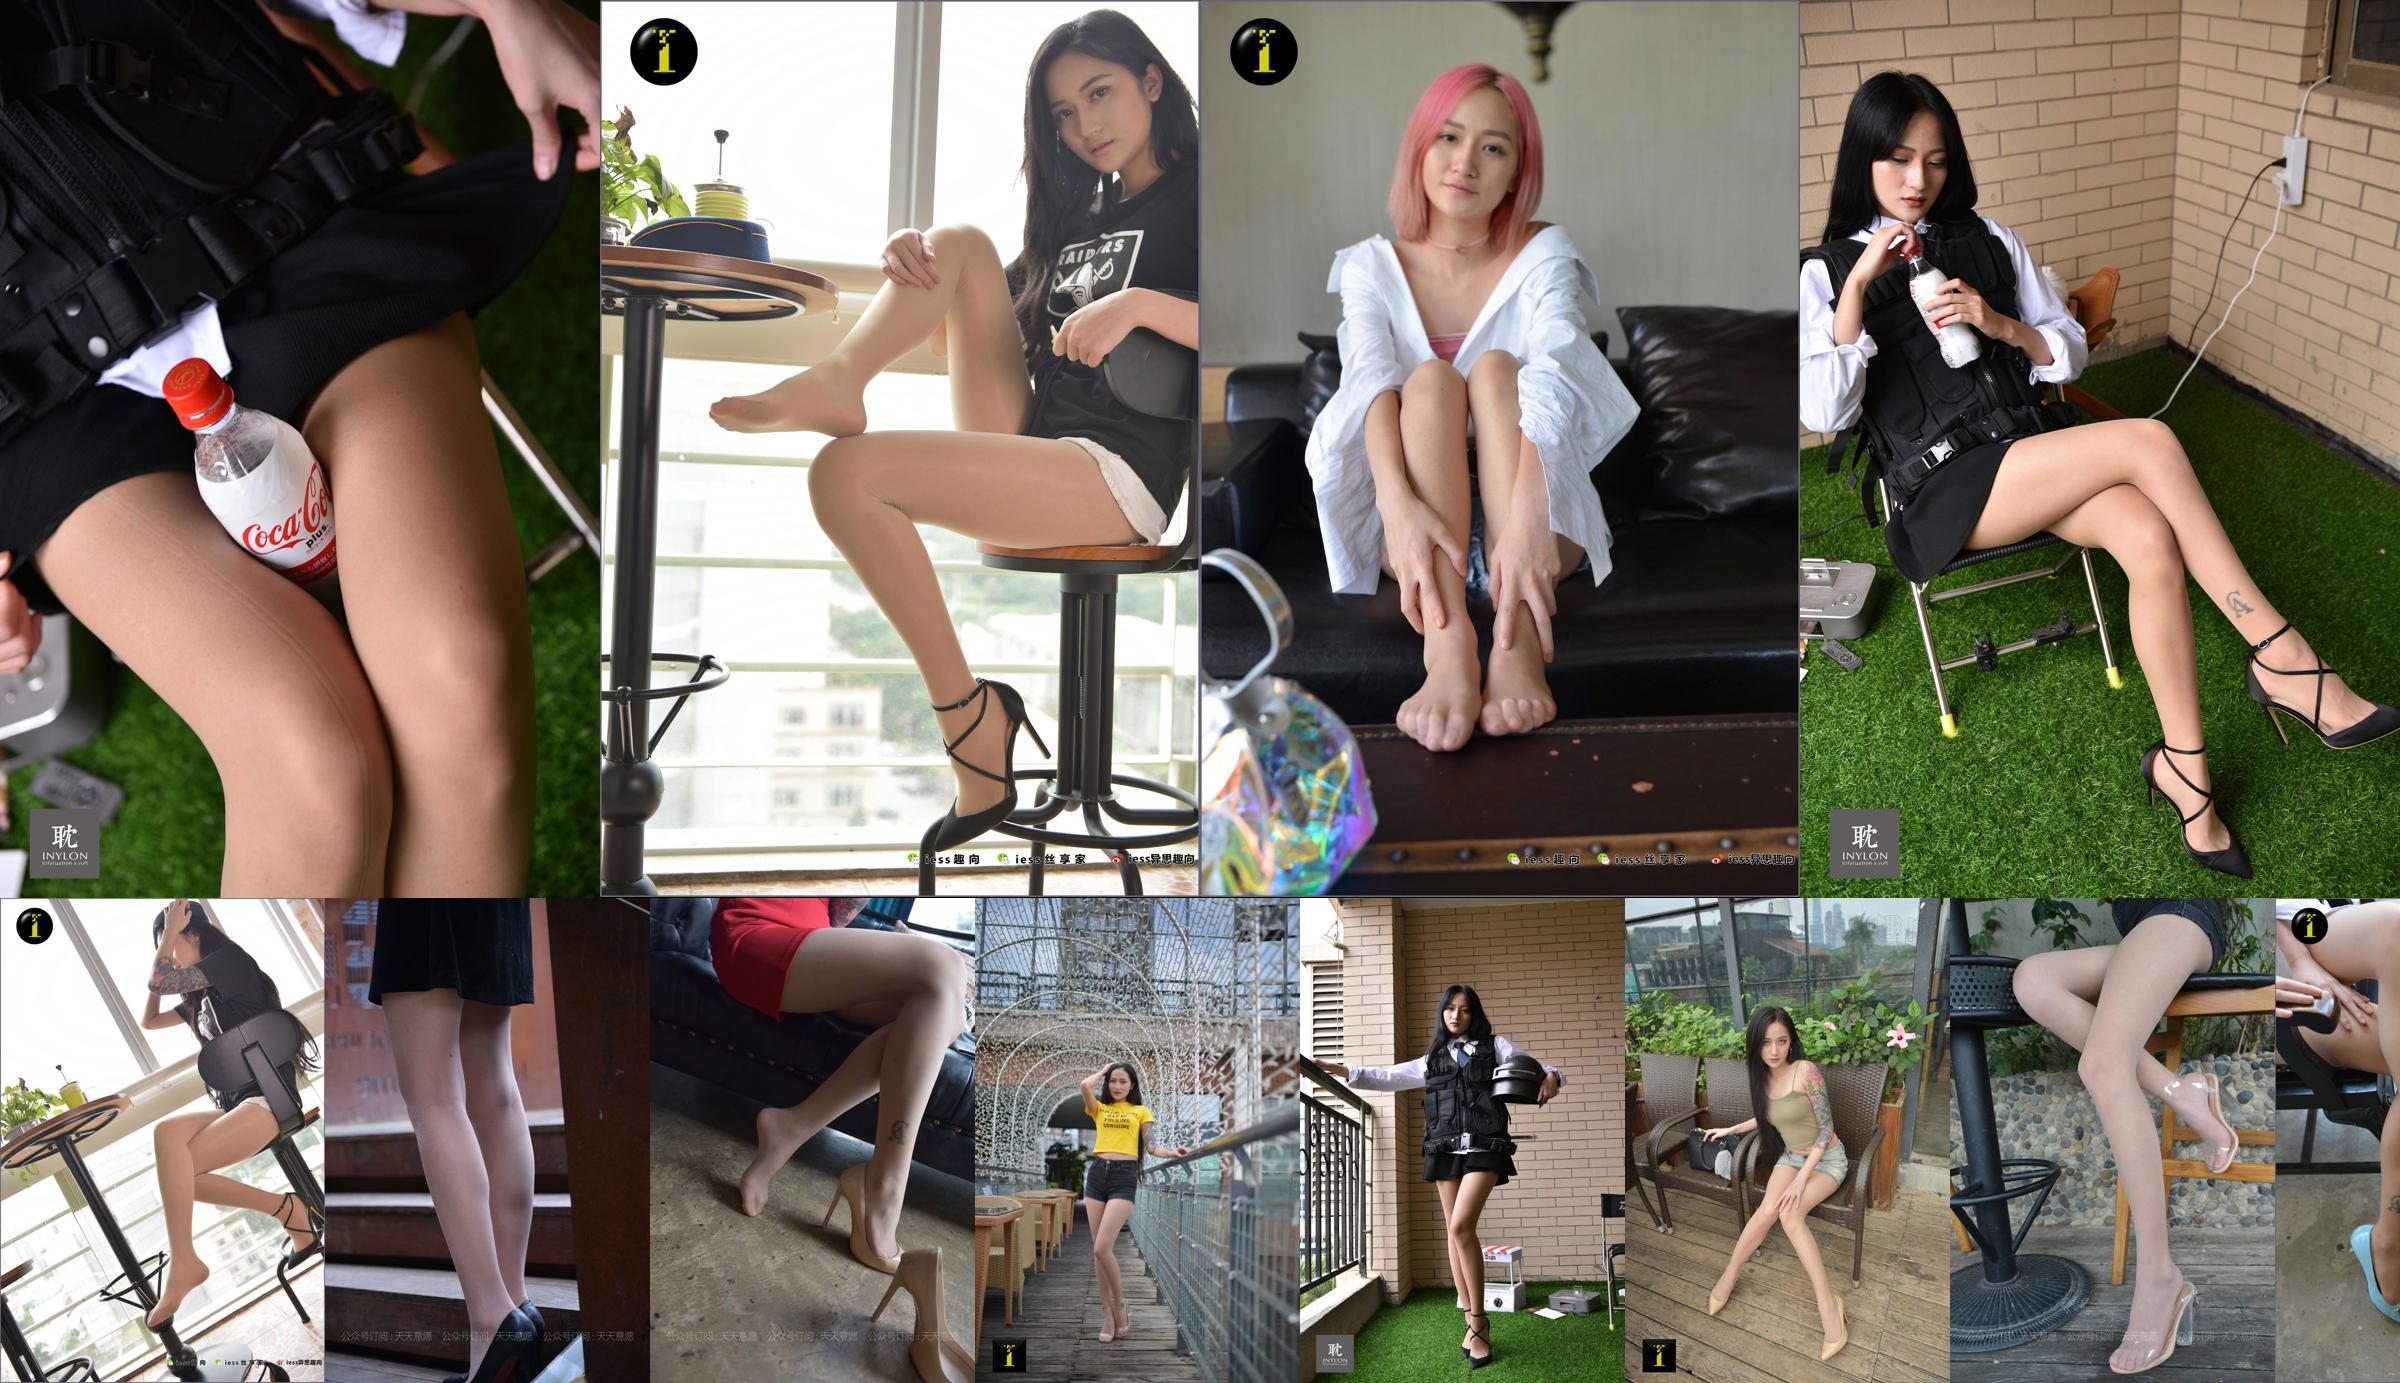 [IESS 奇思趣向] Model: Xiaoxiao "Long-legged Flower Spice Girl" No.dae383 Page 1